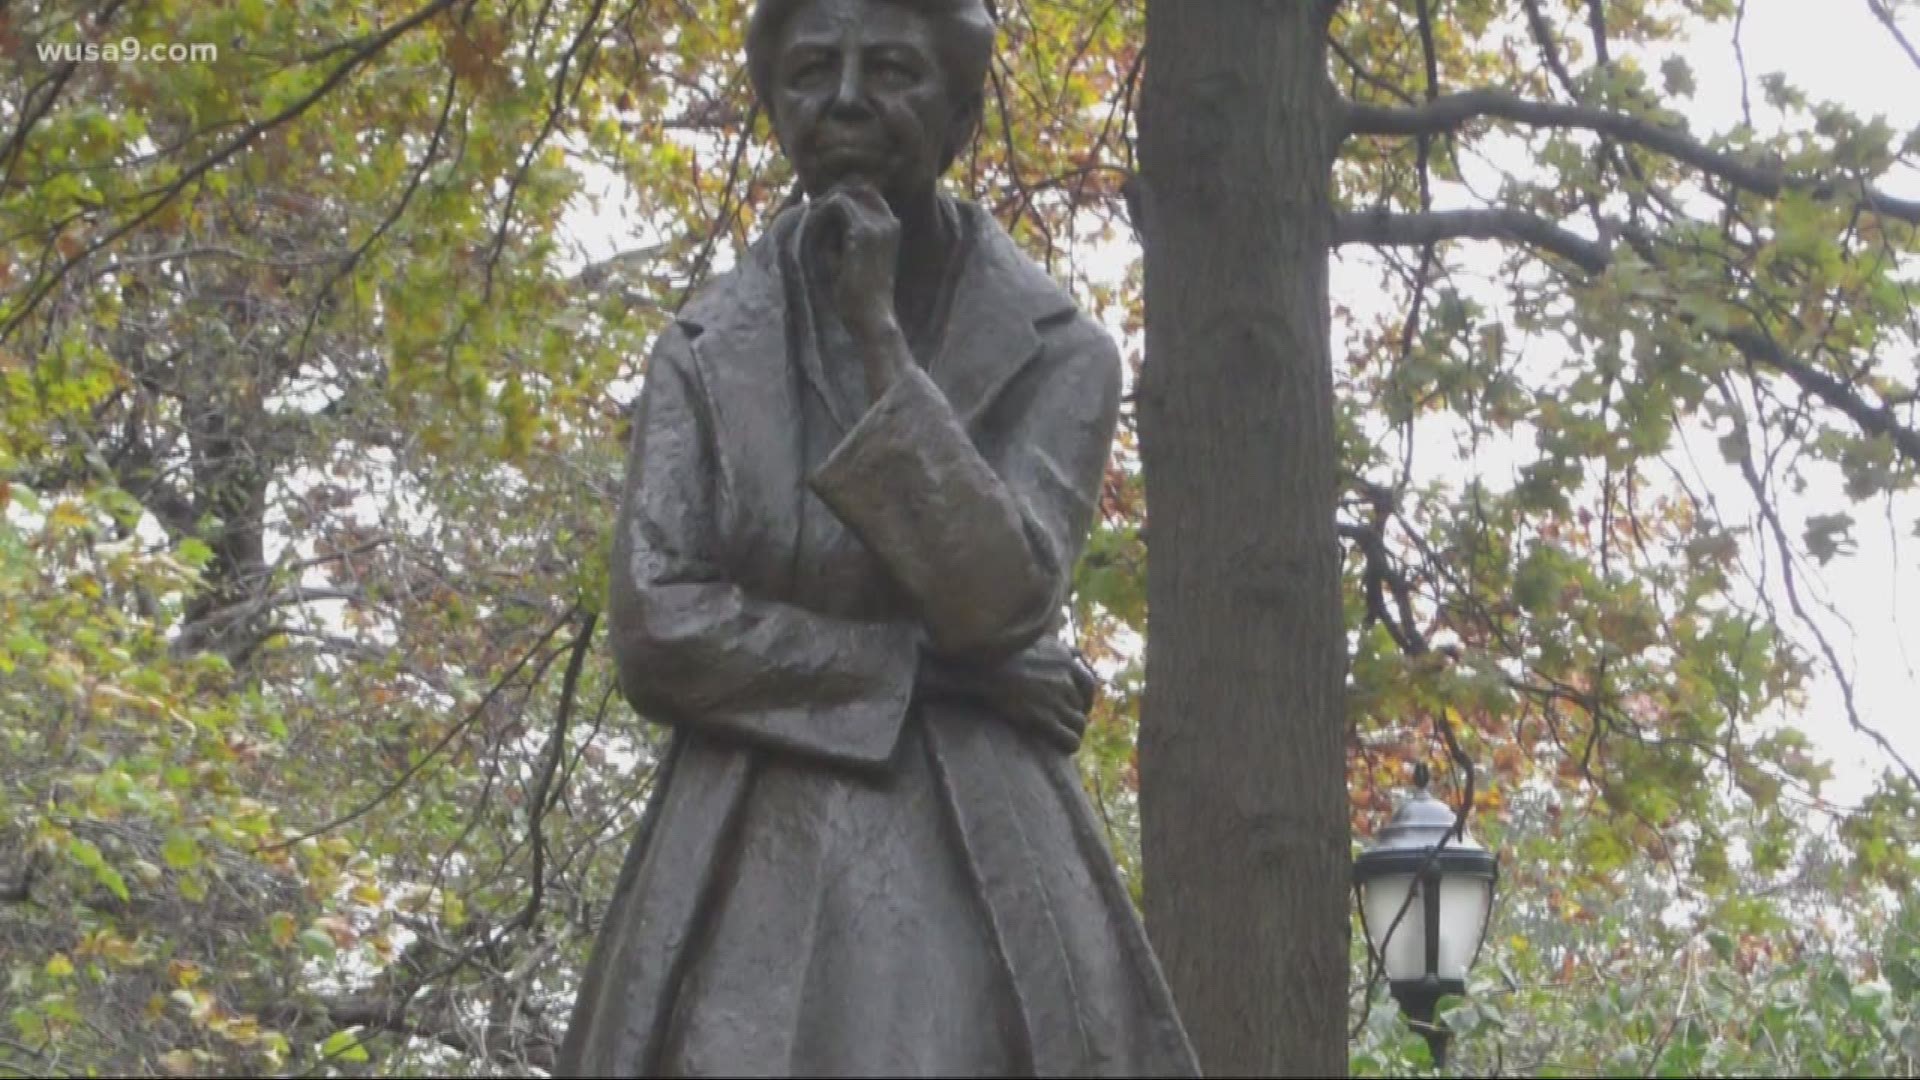 New York City leaders are tackling the gender gap. Their plan is to add four new statues of women around the city.